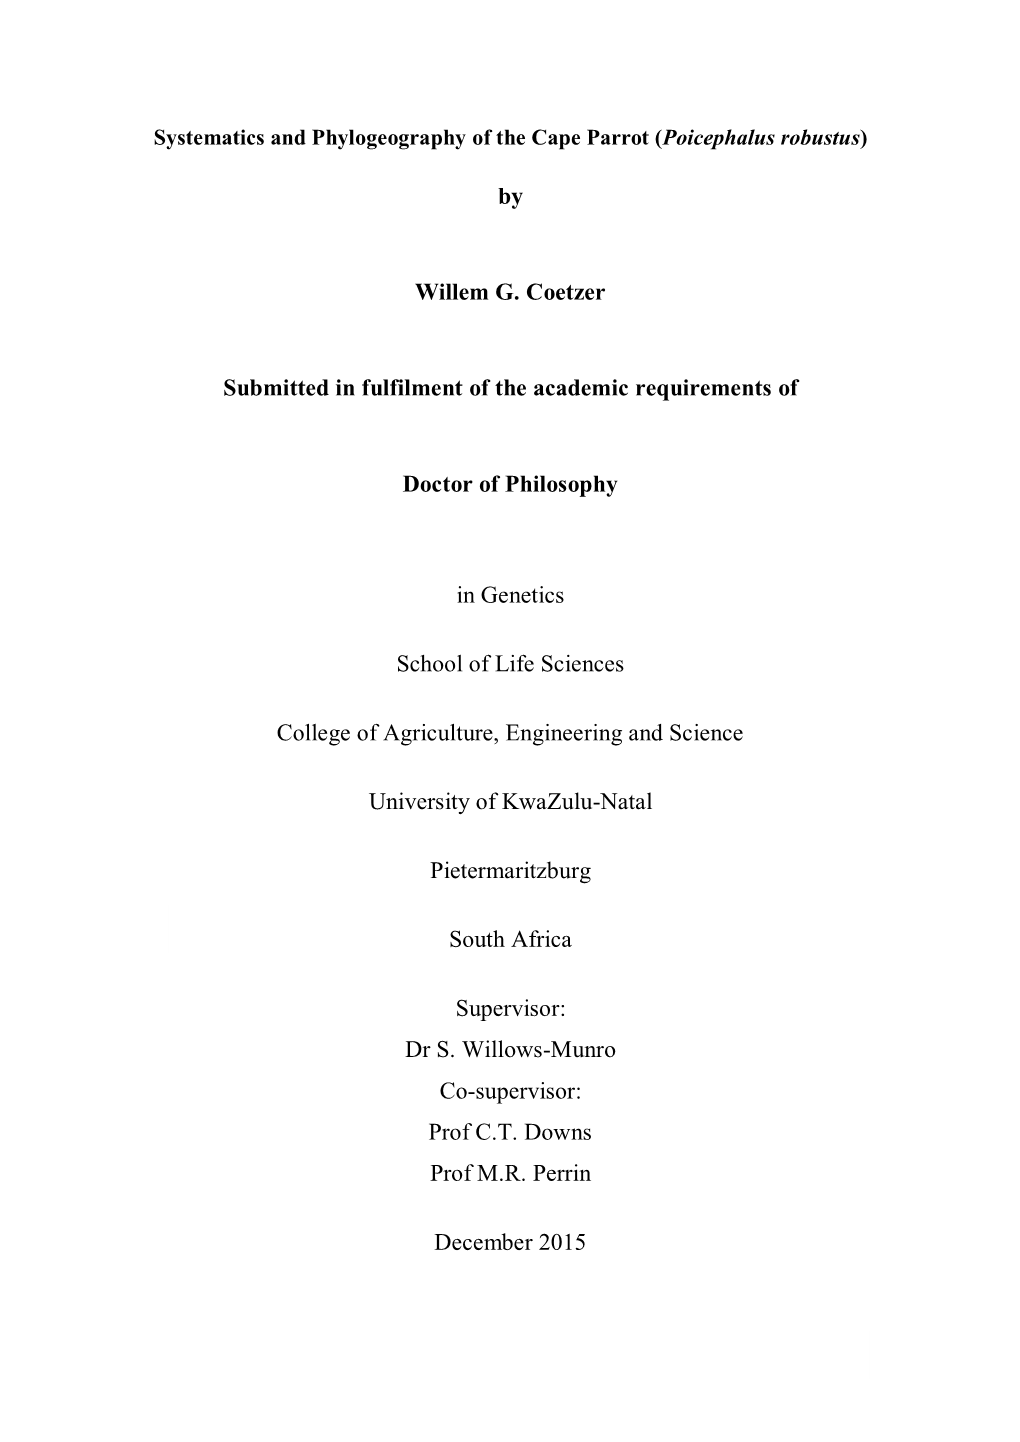 By Willem G. Coetzer Submitted in Fulfilment of the Academic Requirements of Doctor of Philosophy in Genetics School of Life